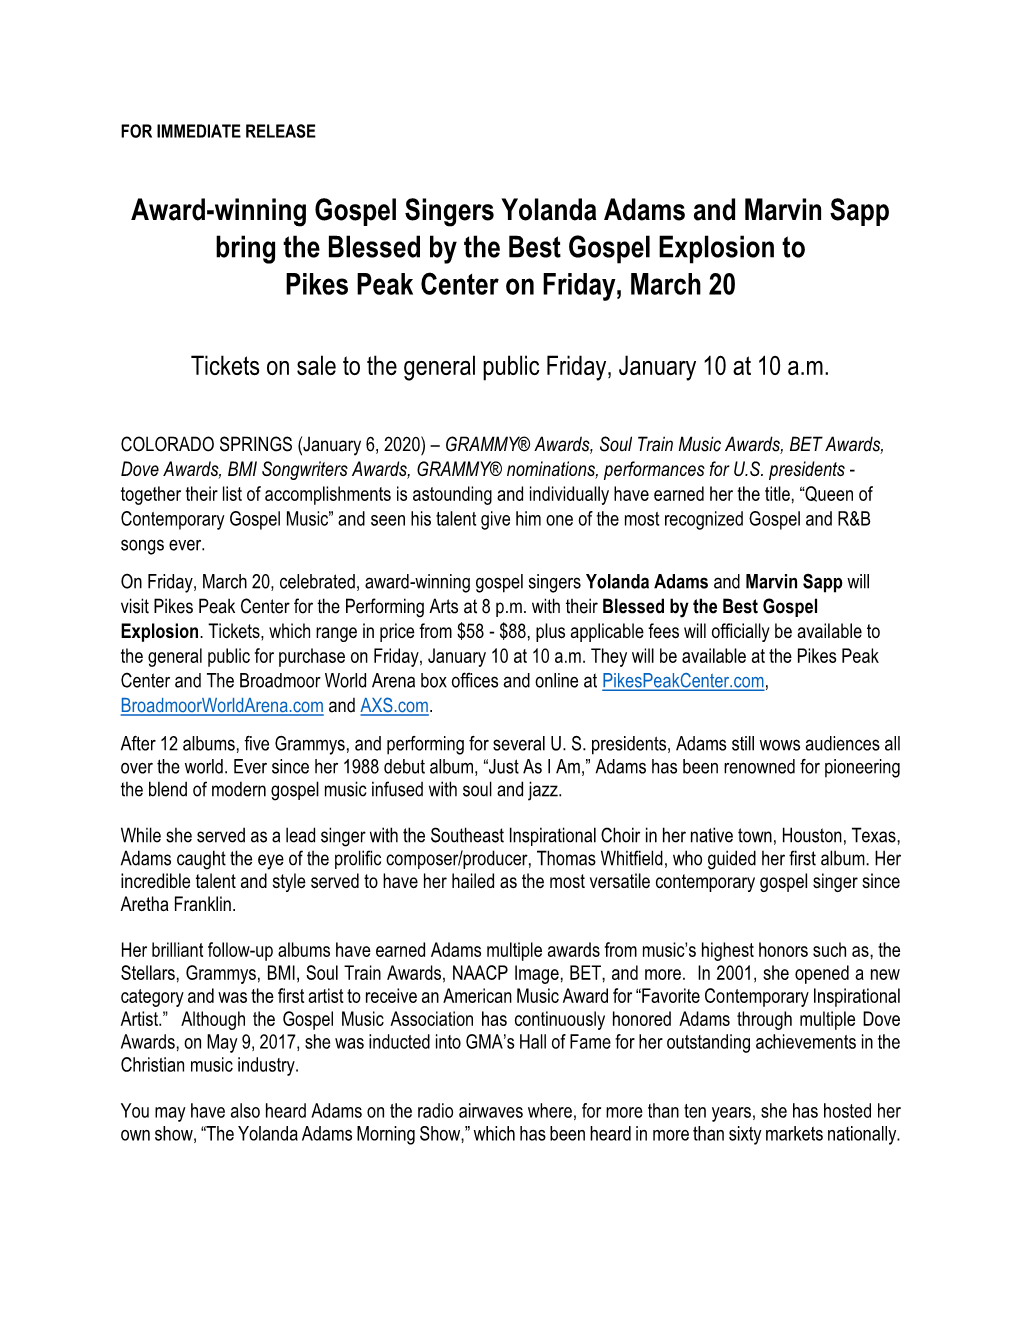 Award-Winning Gospel Singers Yolanda Adams and Marvin Sapp Bring the Blessed by the Best Gospel Explosion to Pikes Peak Center on Friday, March 20